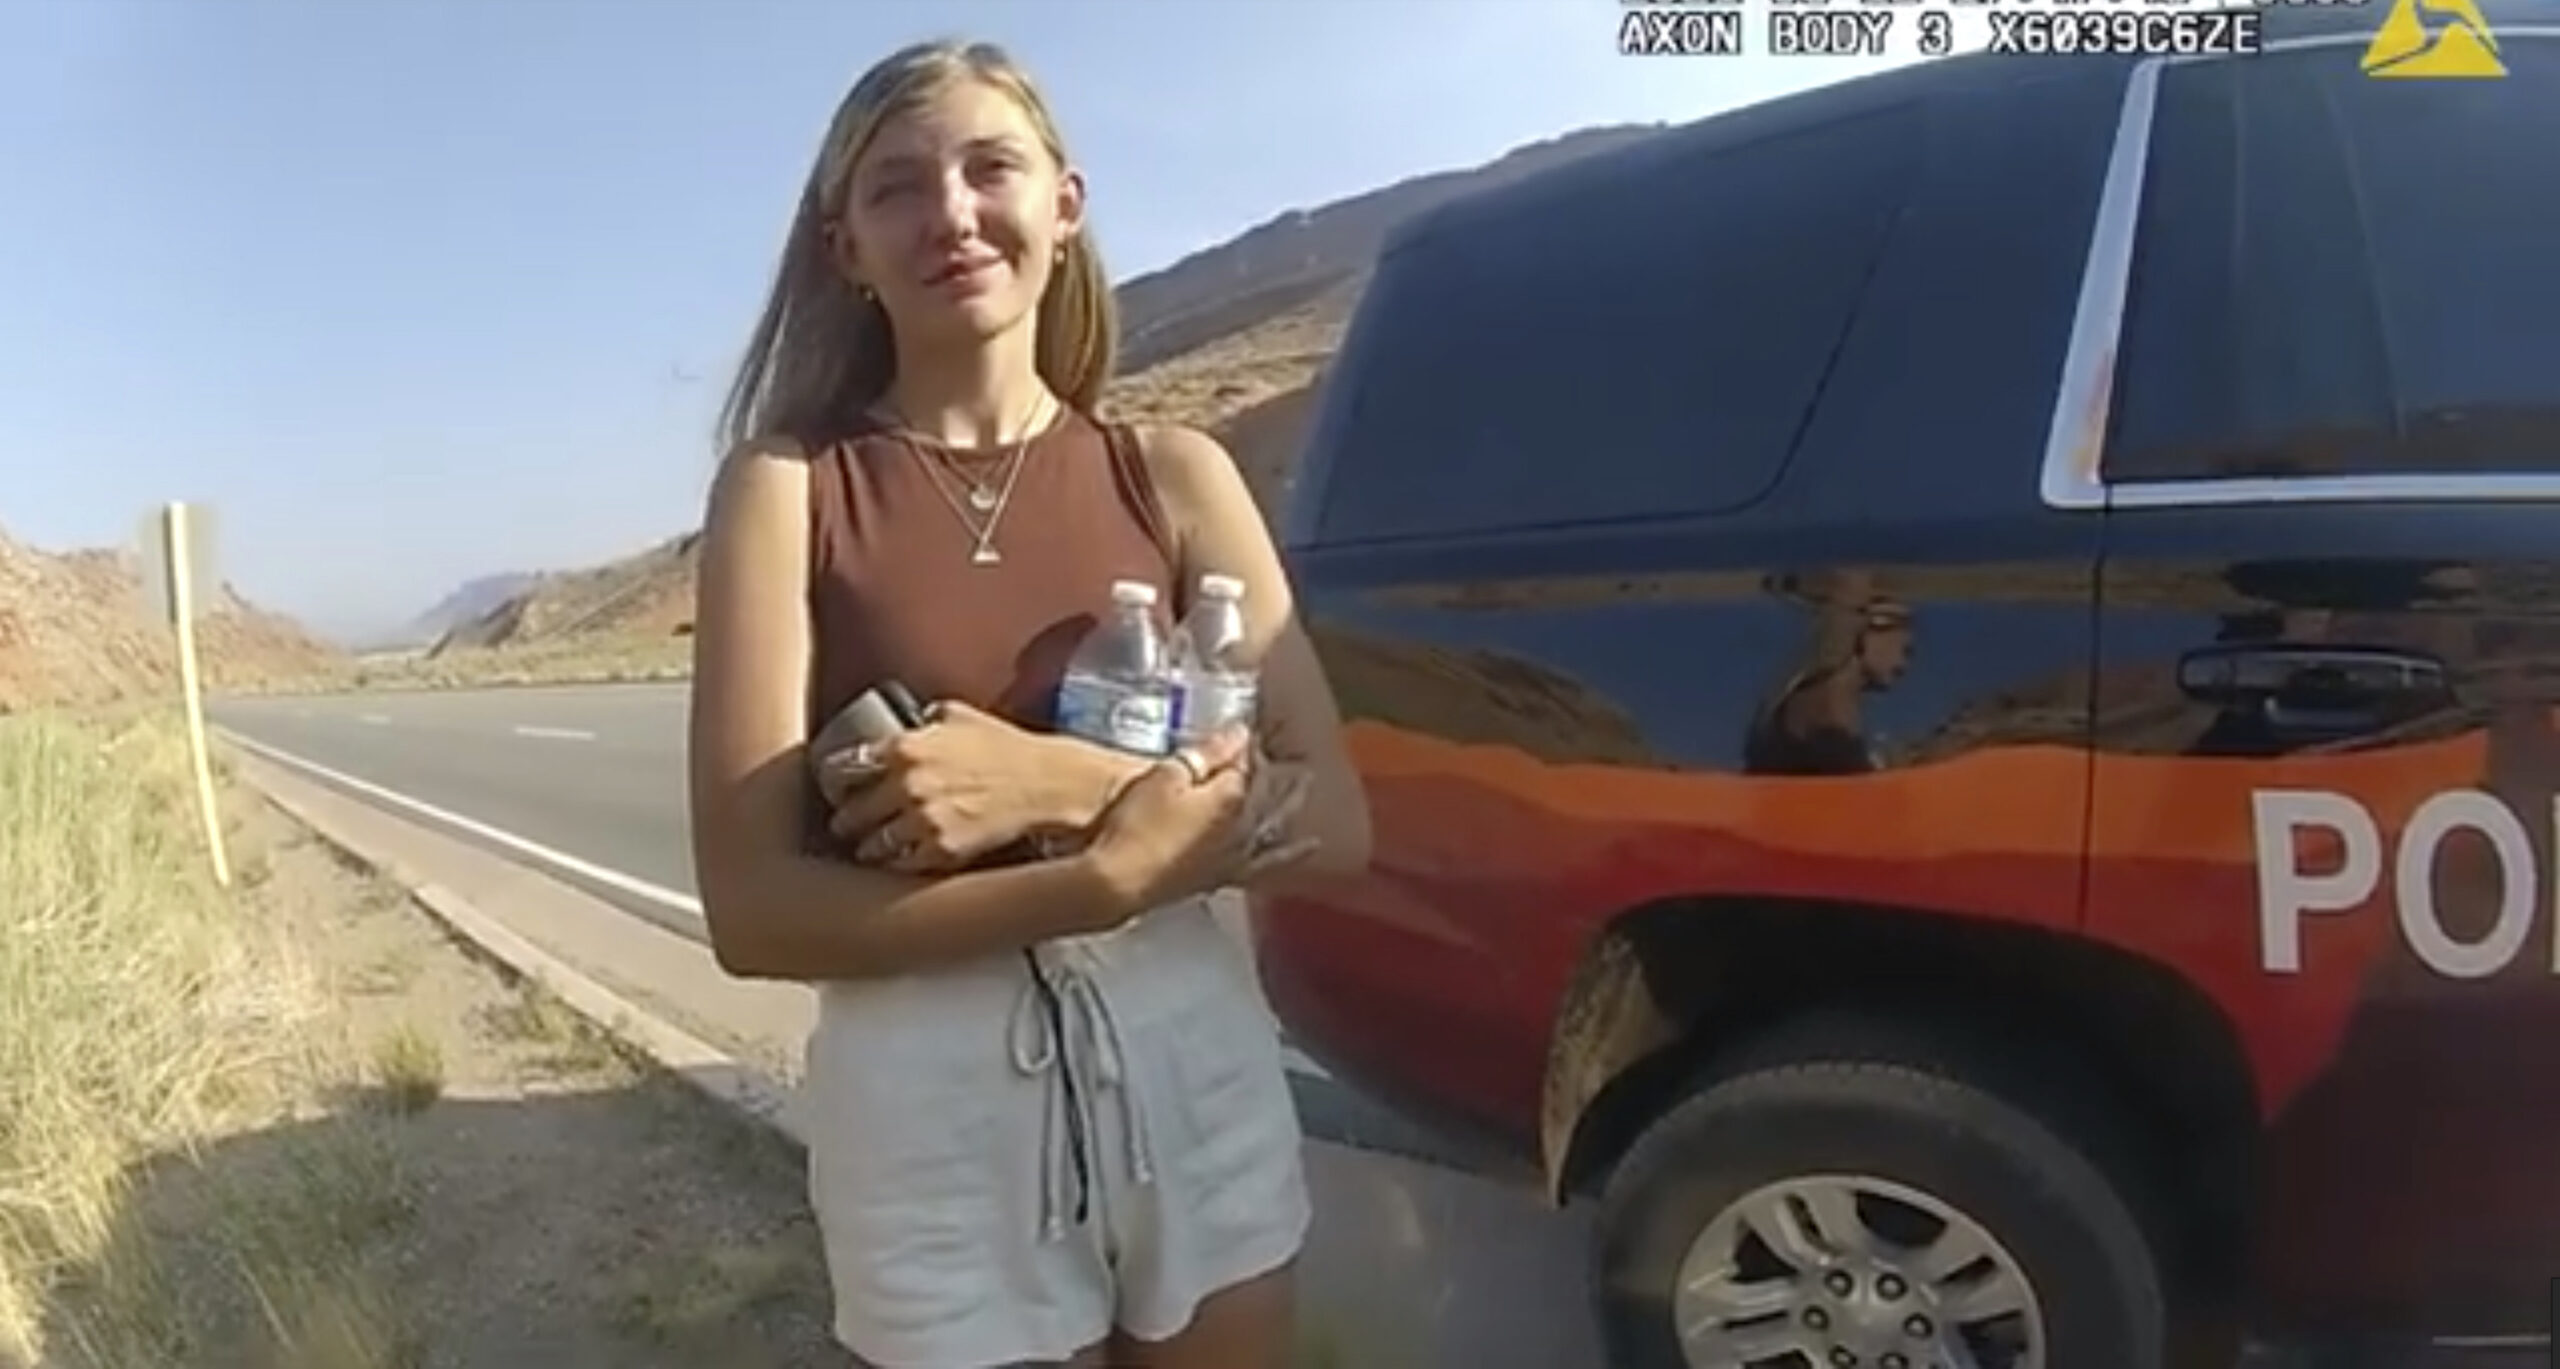 FILE - This police camera video provided by The Moab Police Department shows Gabrielle "Gabby" Petito talking to a police officer after police pulled over the van she was traveling in with her boyfriend, Brian Laundrie, near the entrance to Arches National Park on Aug. 12, 2021. Teton County Coroner Brent Blue is scheduled to announce the findings of Petito's autopsy at a news conference early Tuesday, Oct. 12. (The Moab Police Department via AP)